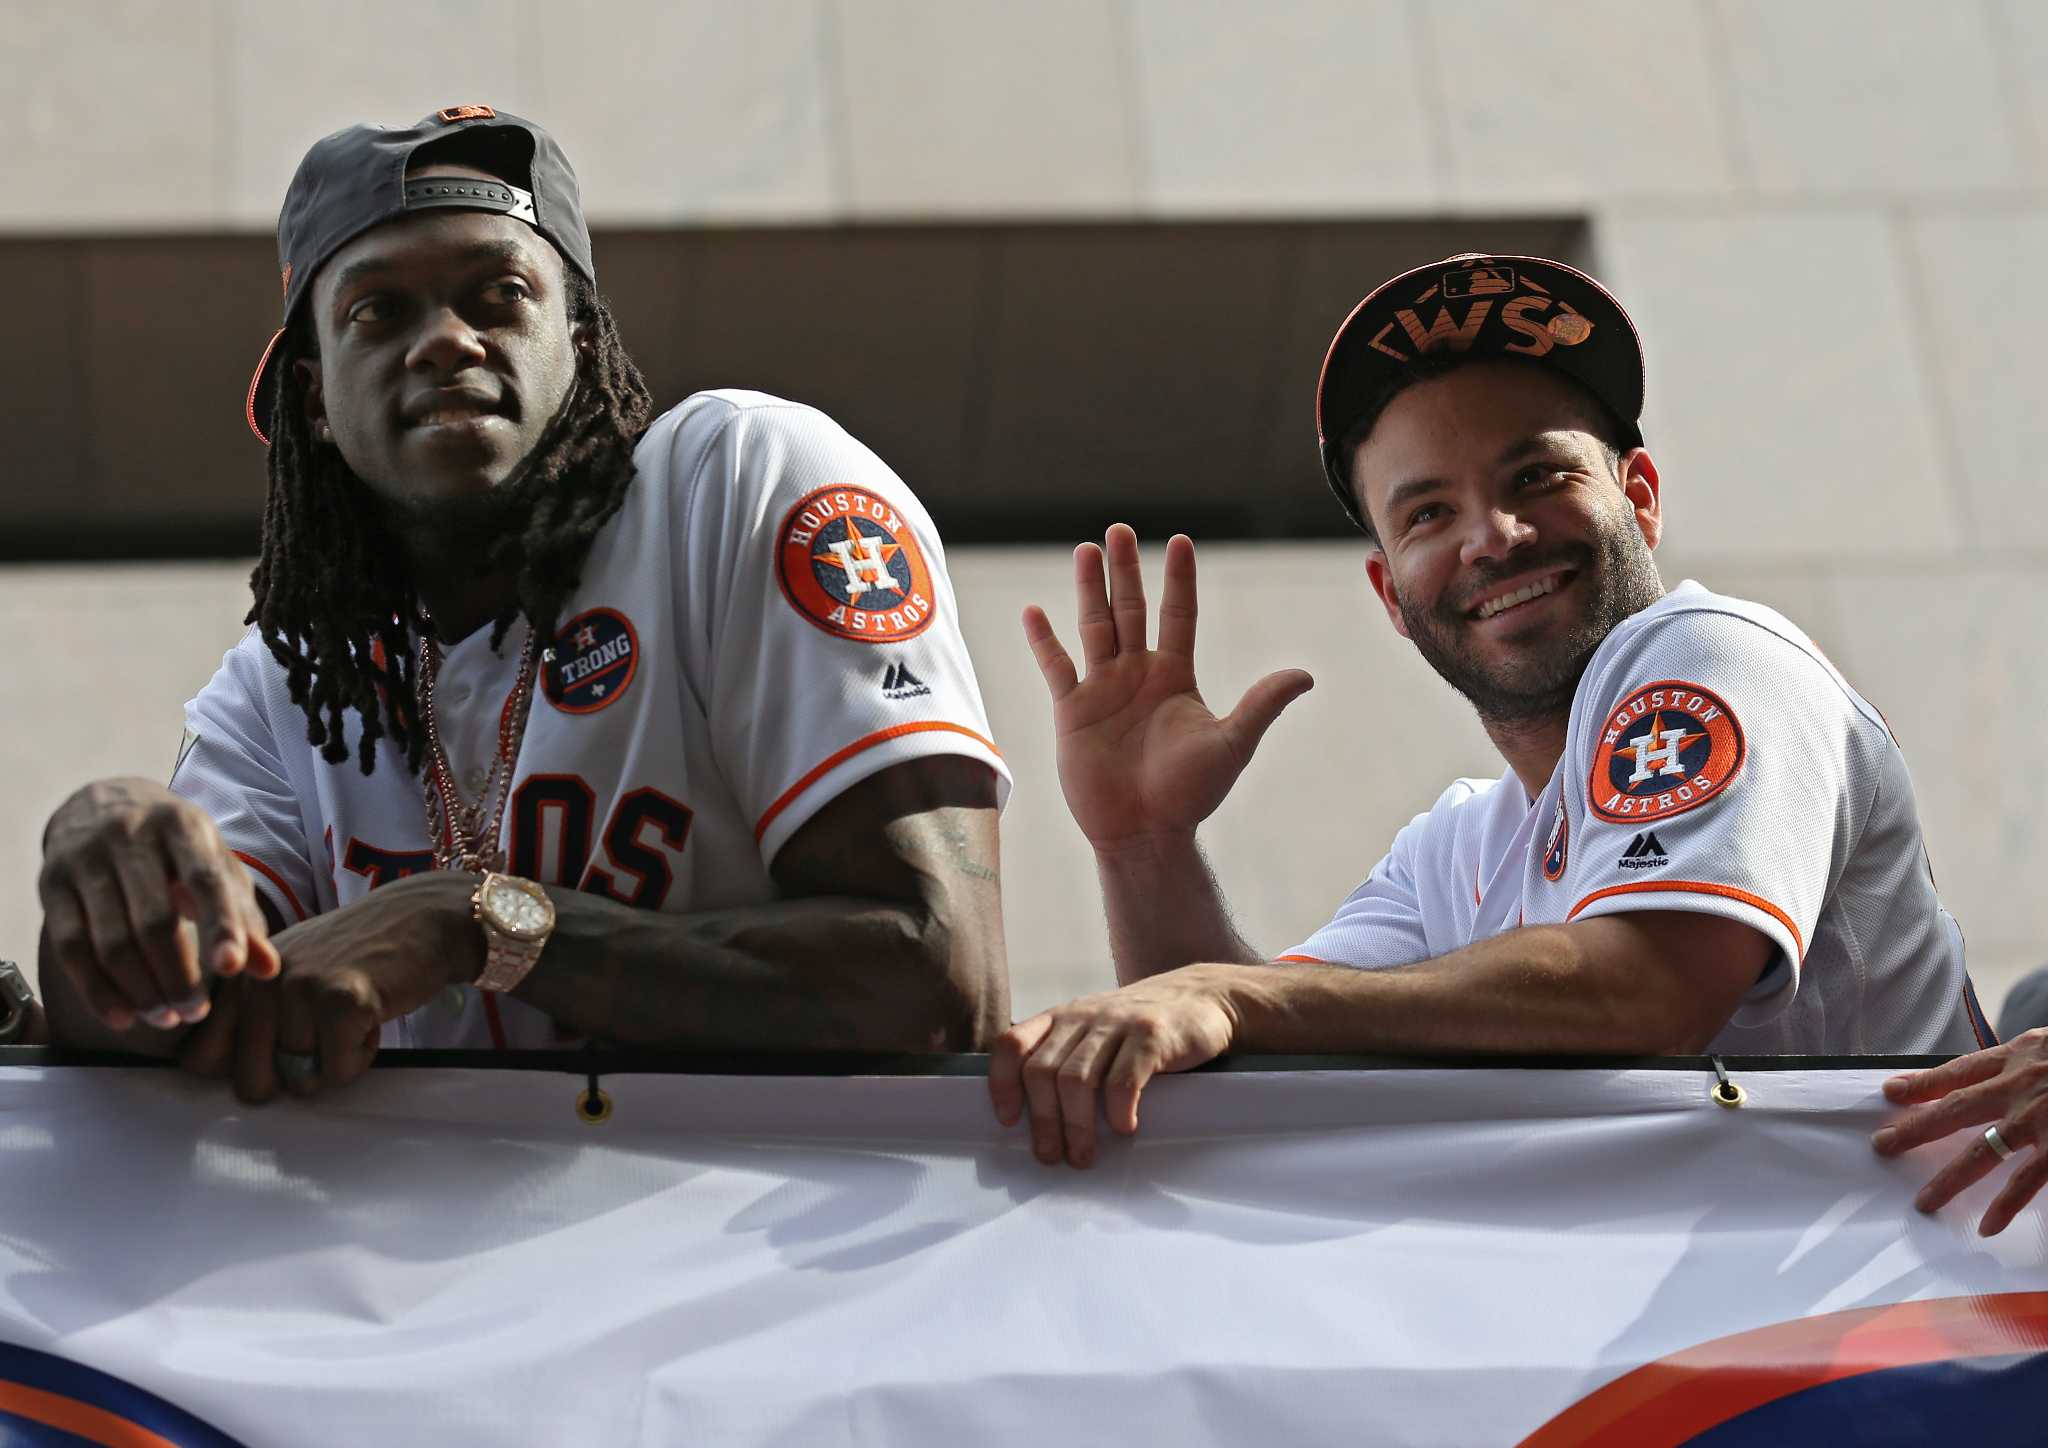 Hundreds of thousands flock to downtown Houston to celebrate Astros'  first-ever World Series title